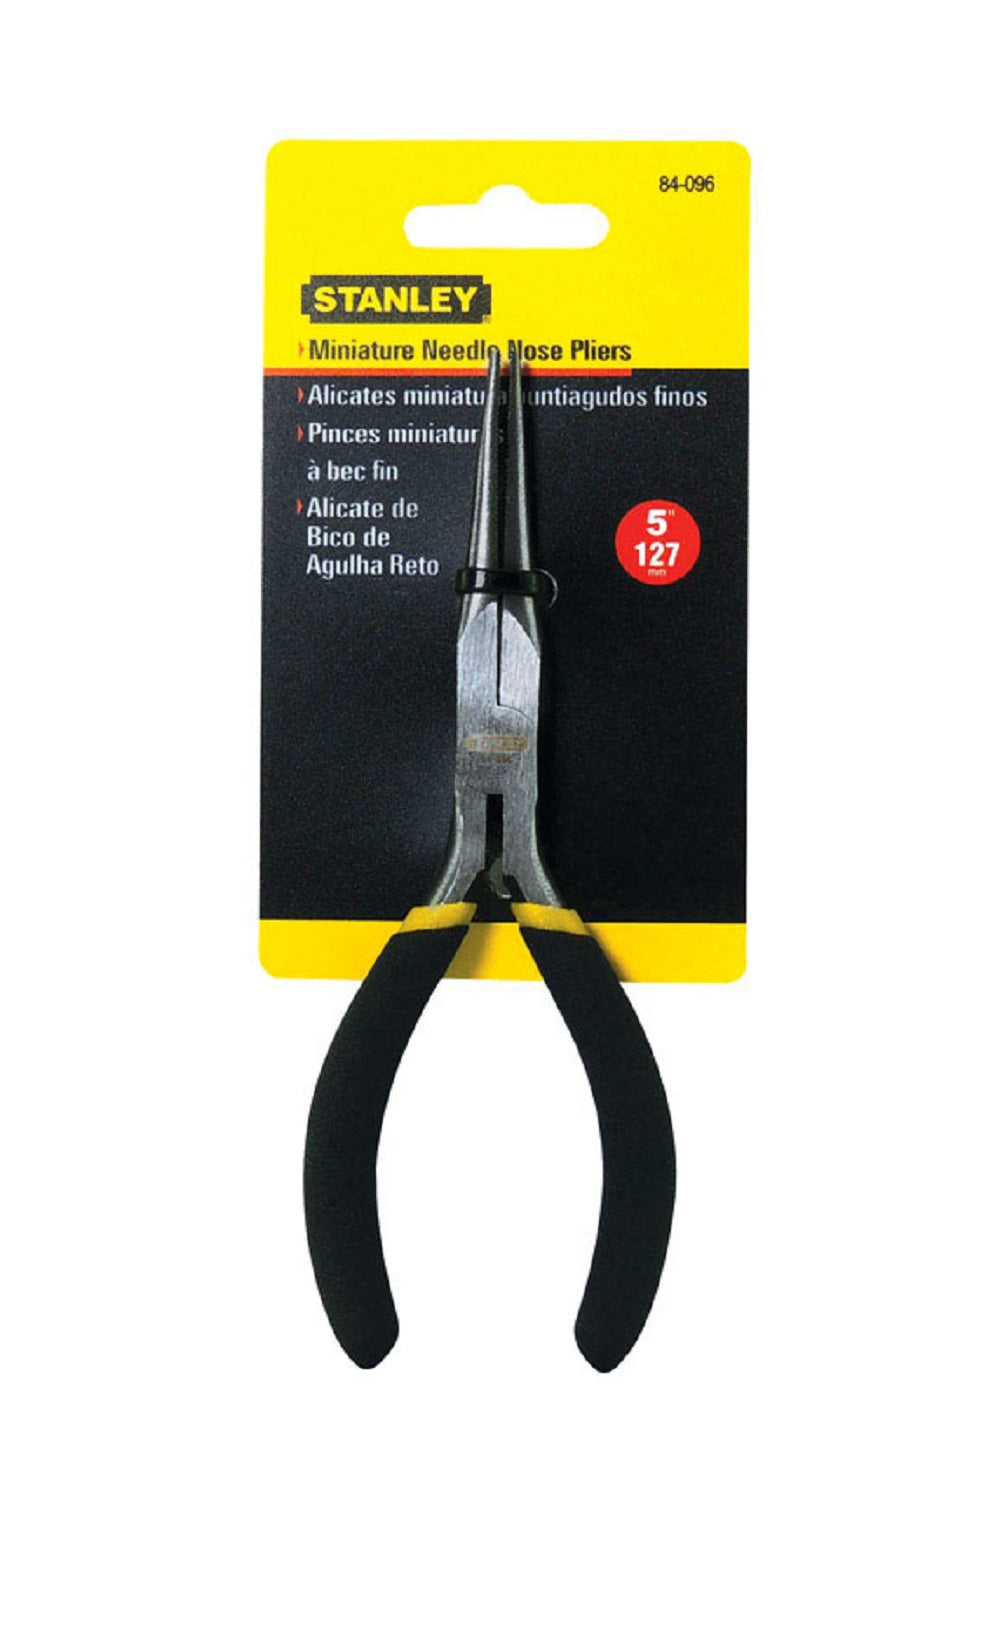 buy pliers, cutters & wrenches at cheap rate in bulk. wholesale & retail repair hand tools store. home décor ideas, maintenance, repair replacement parts